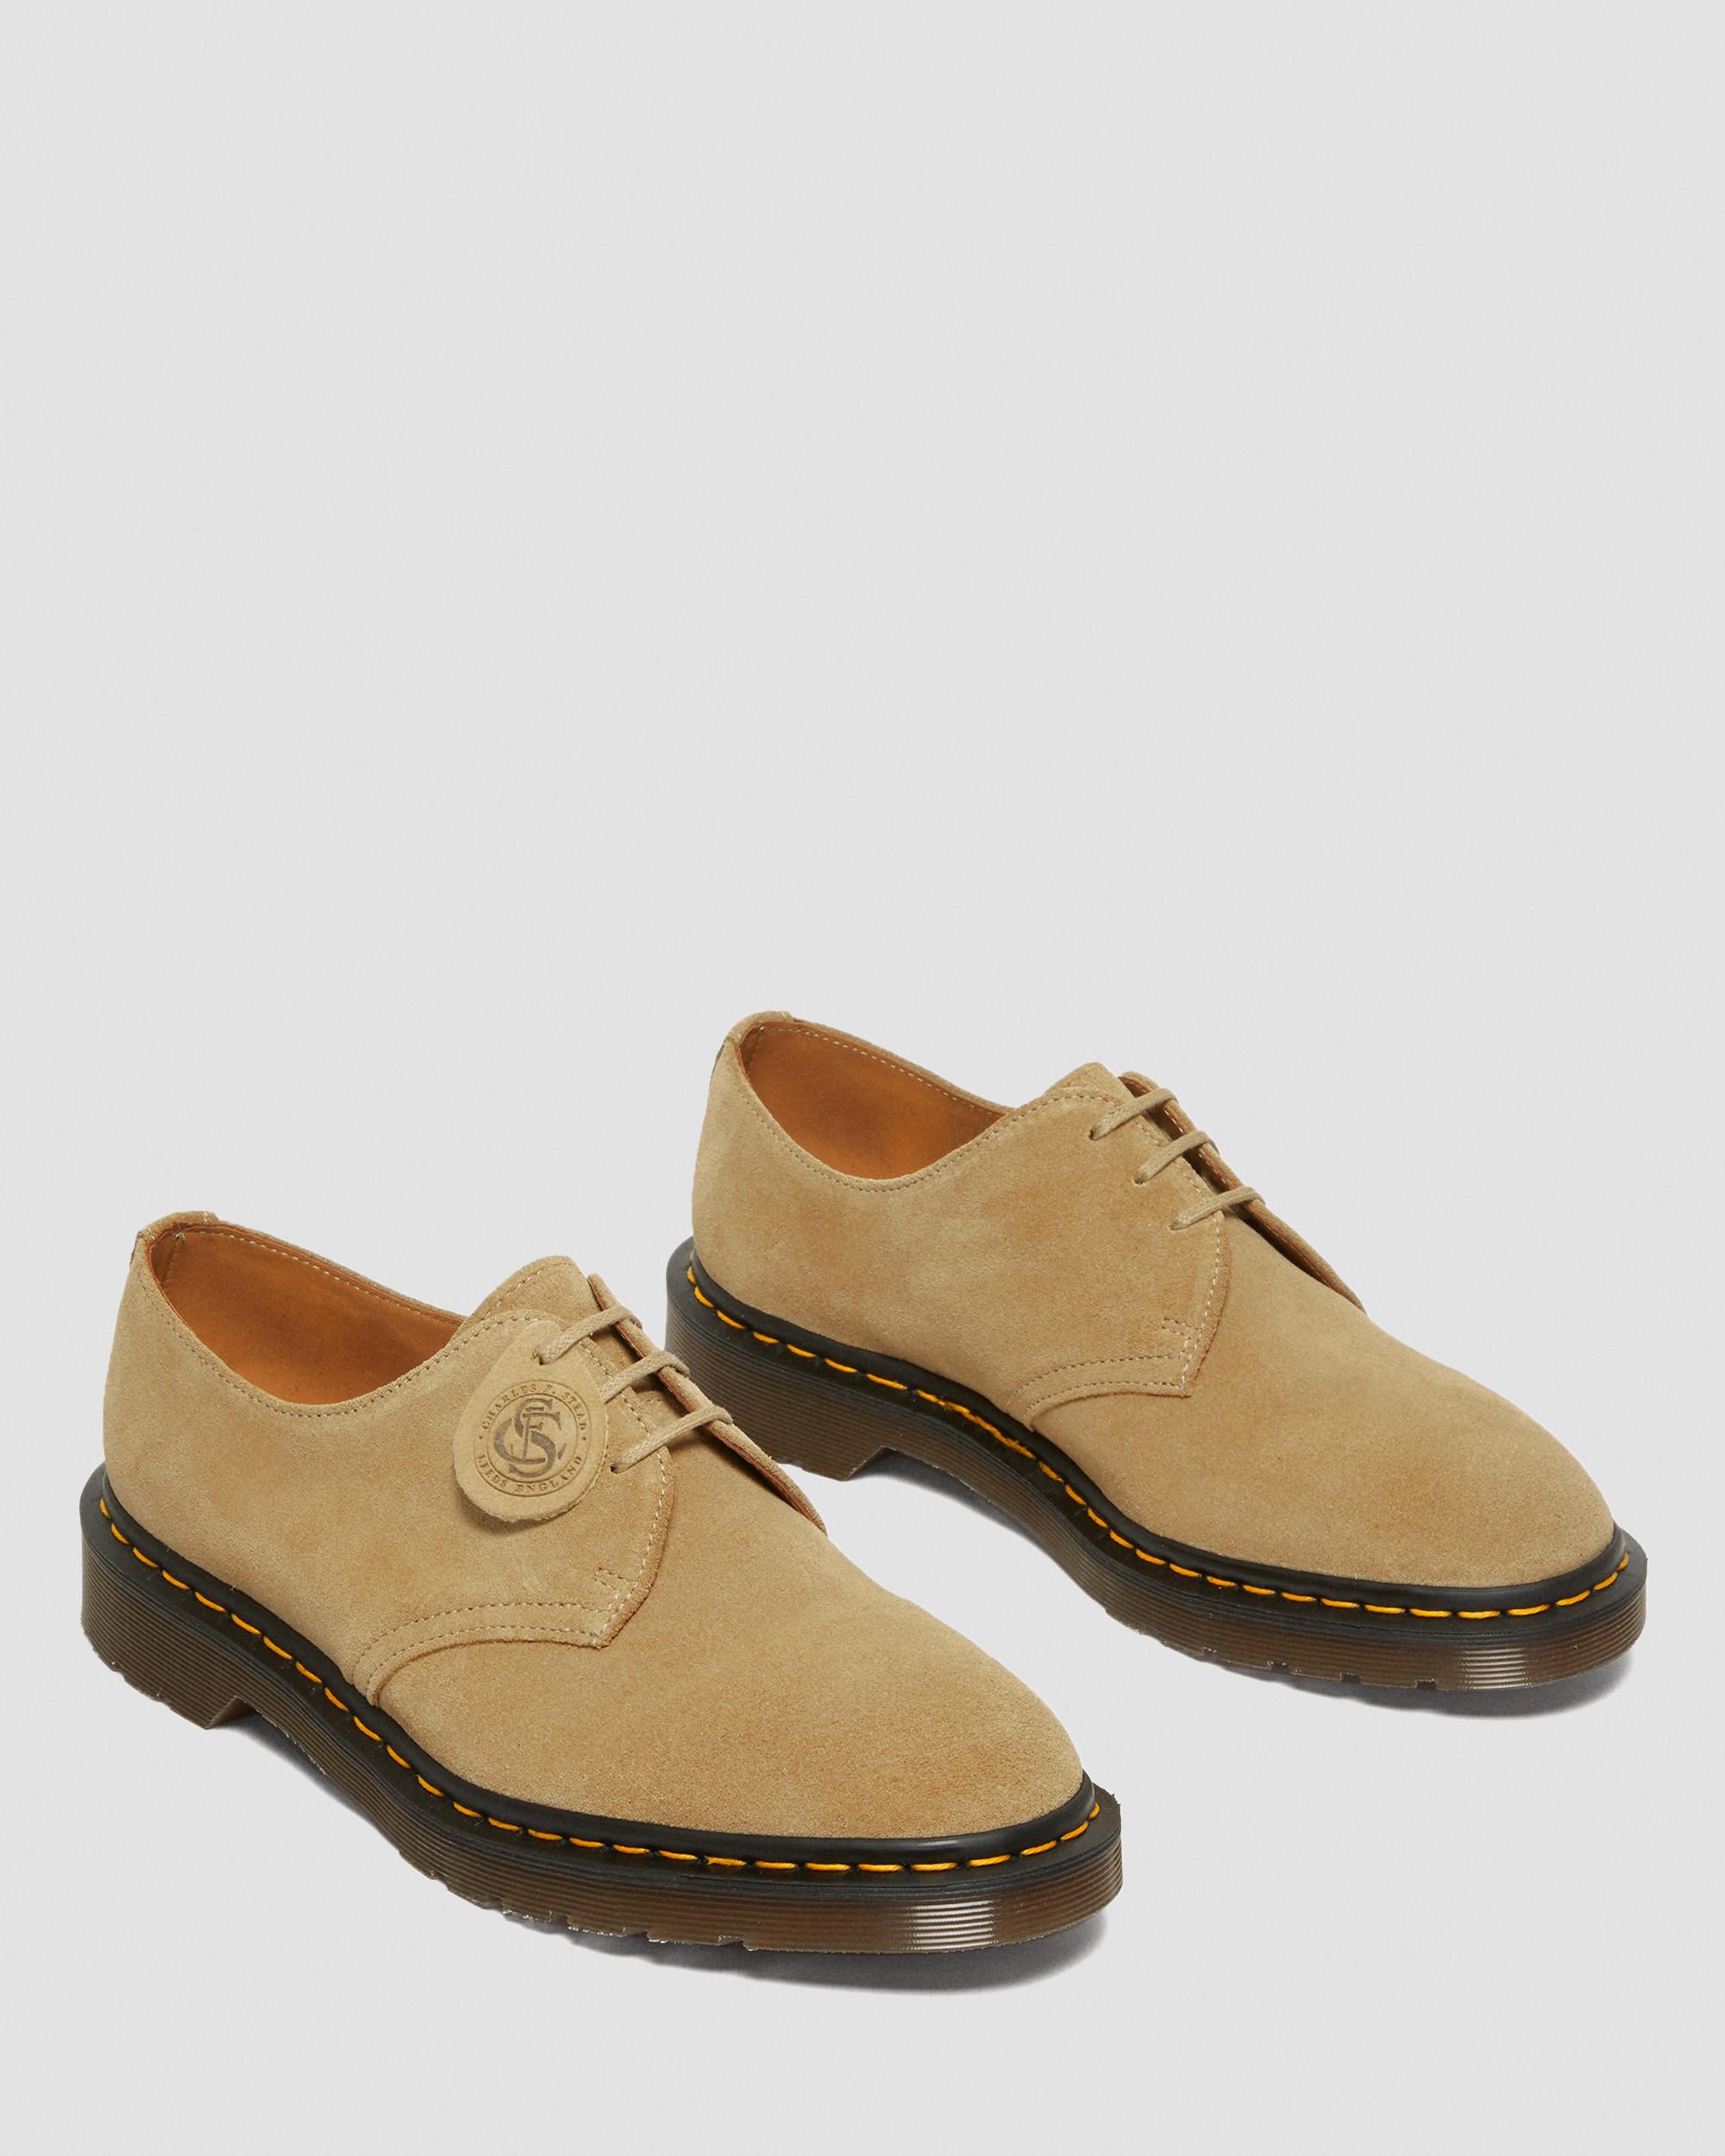 1461 Made in England Buck Suede Oxford Shoes in Beige